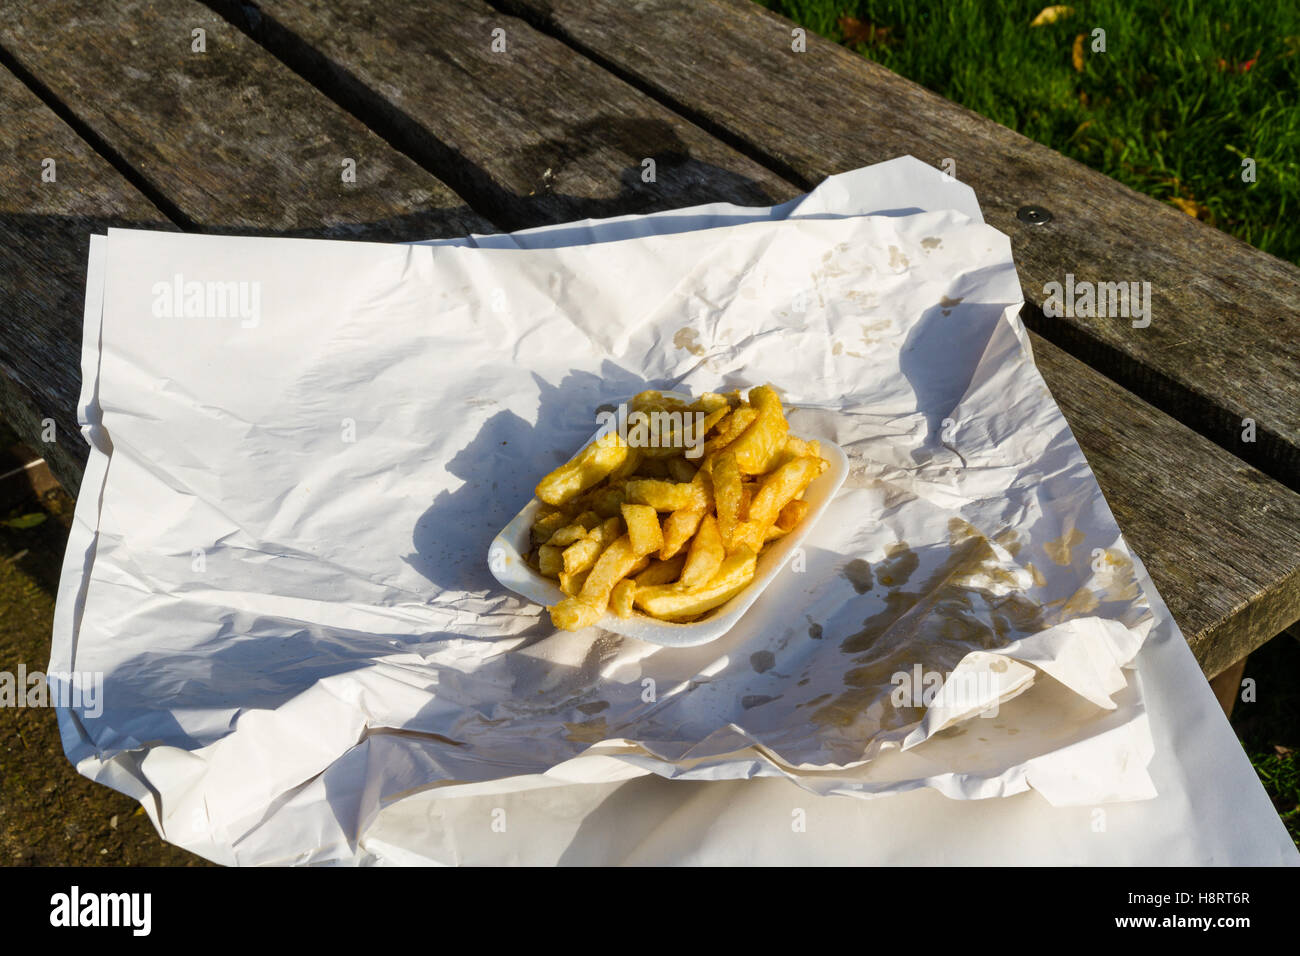 Portion of British chips or fries, in carton with wrapping paper on a sunny day. Stock Photo